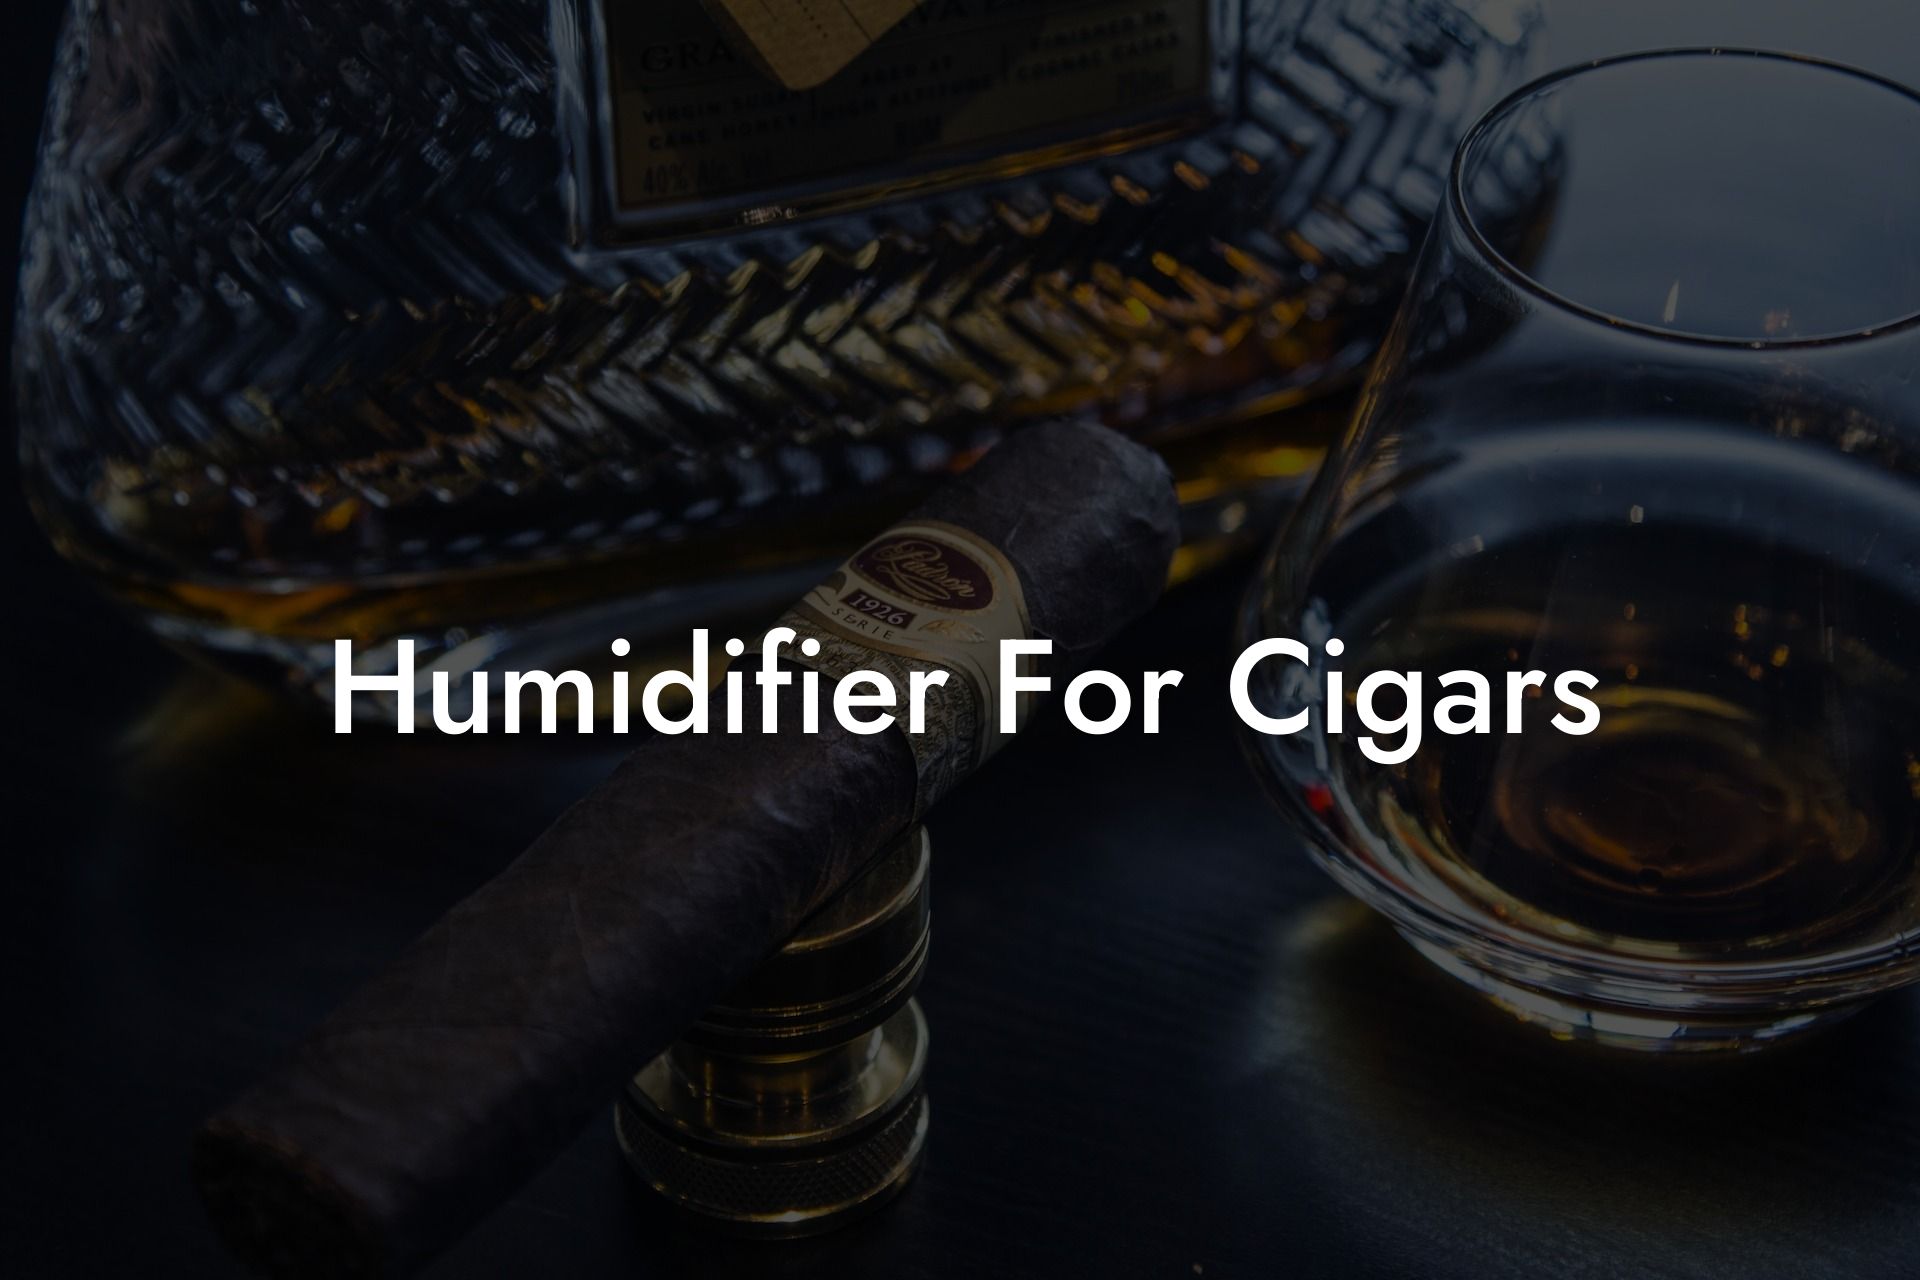 Humidifier For Cigars